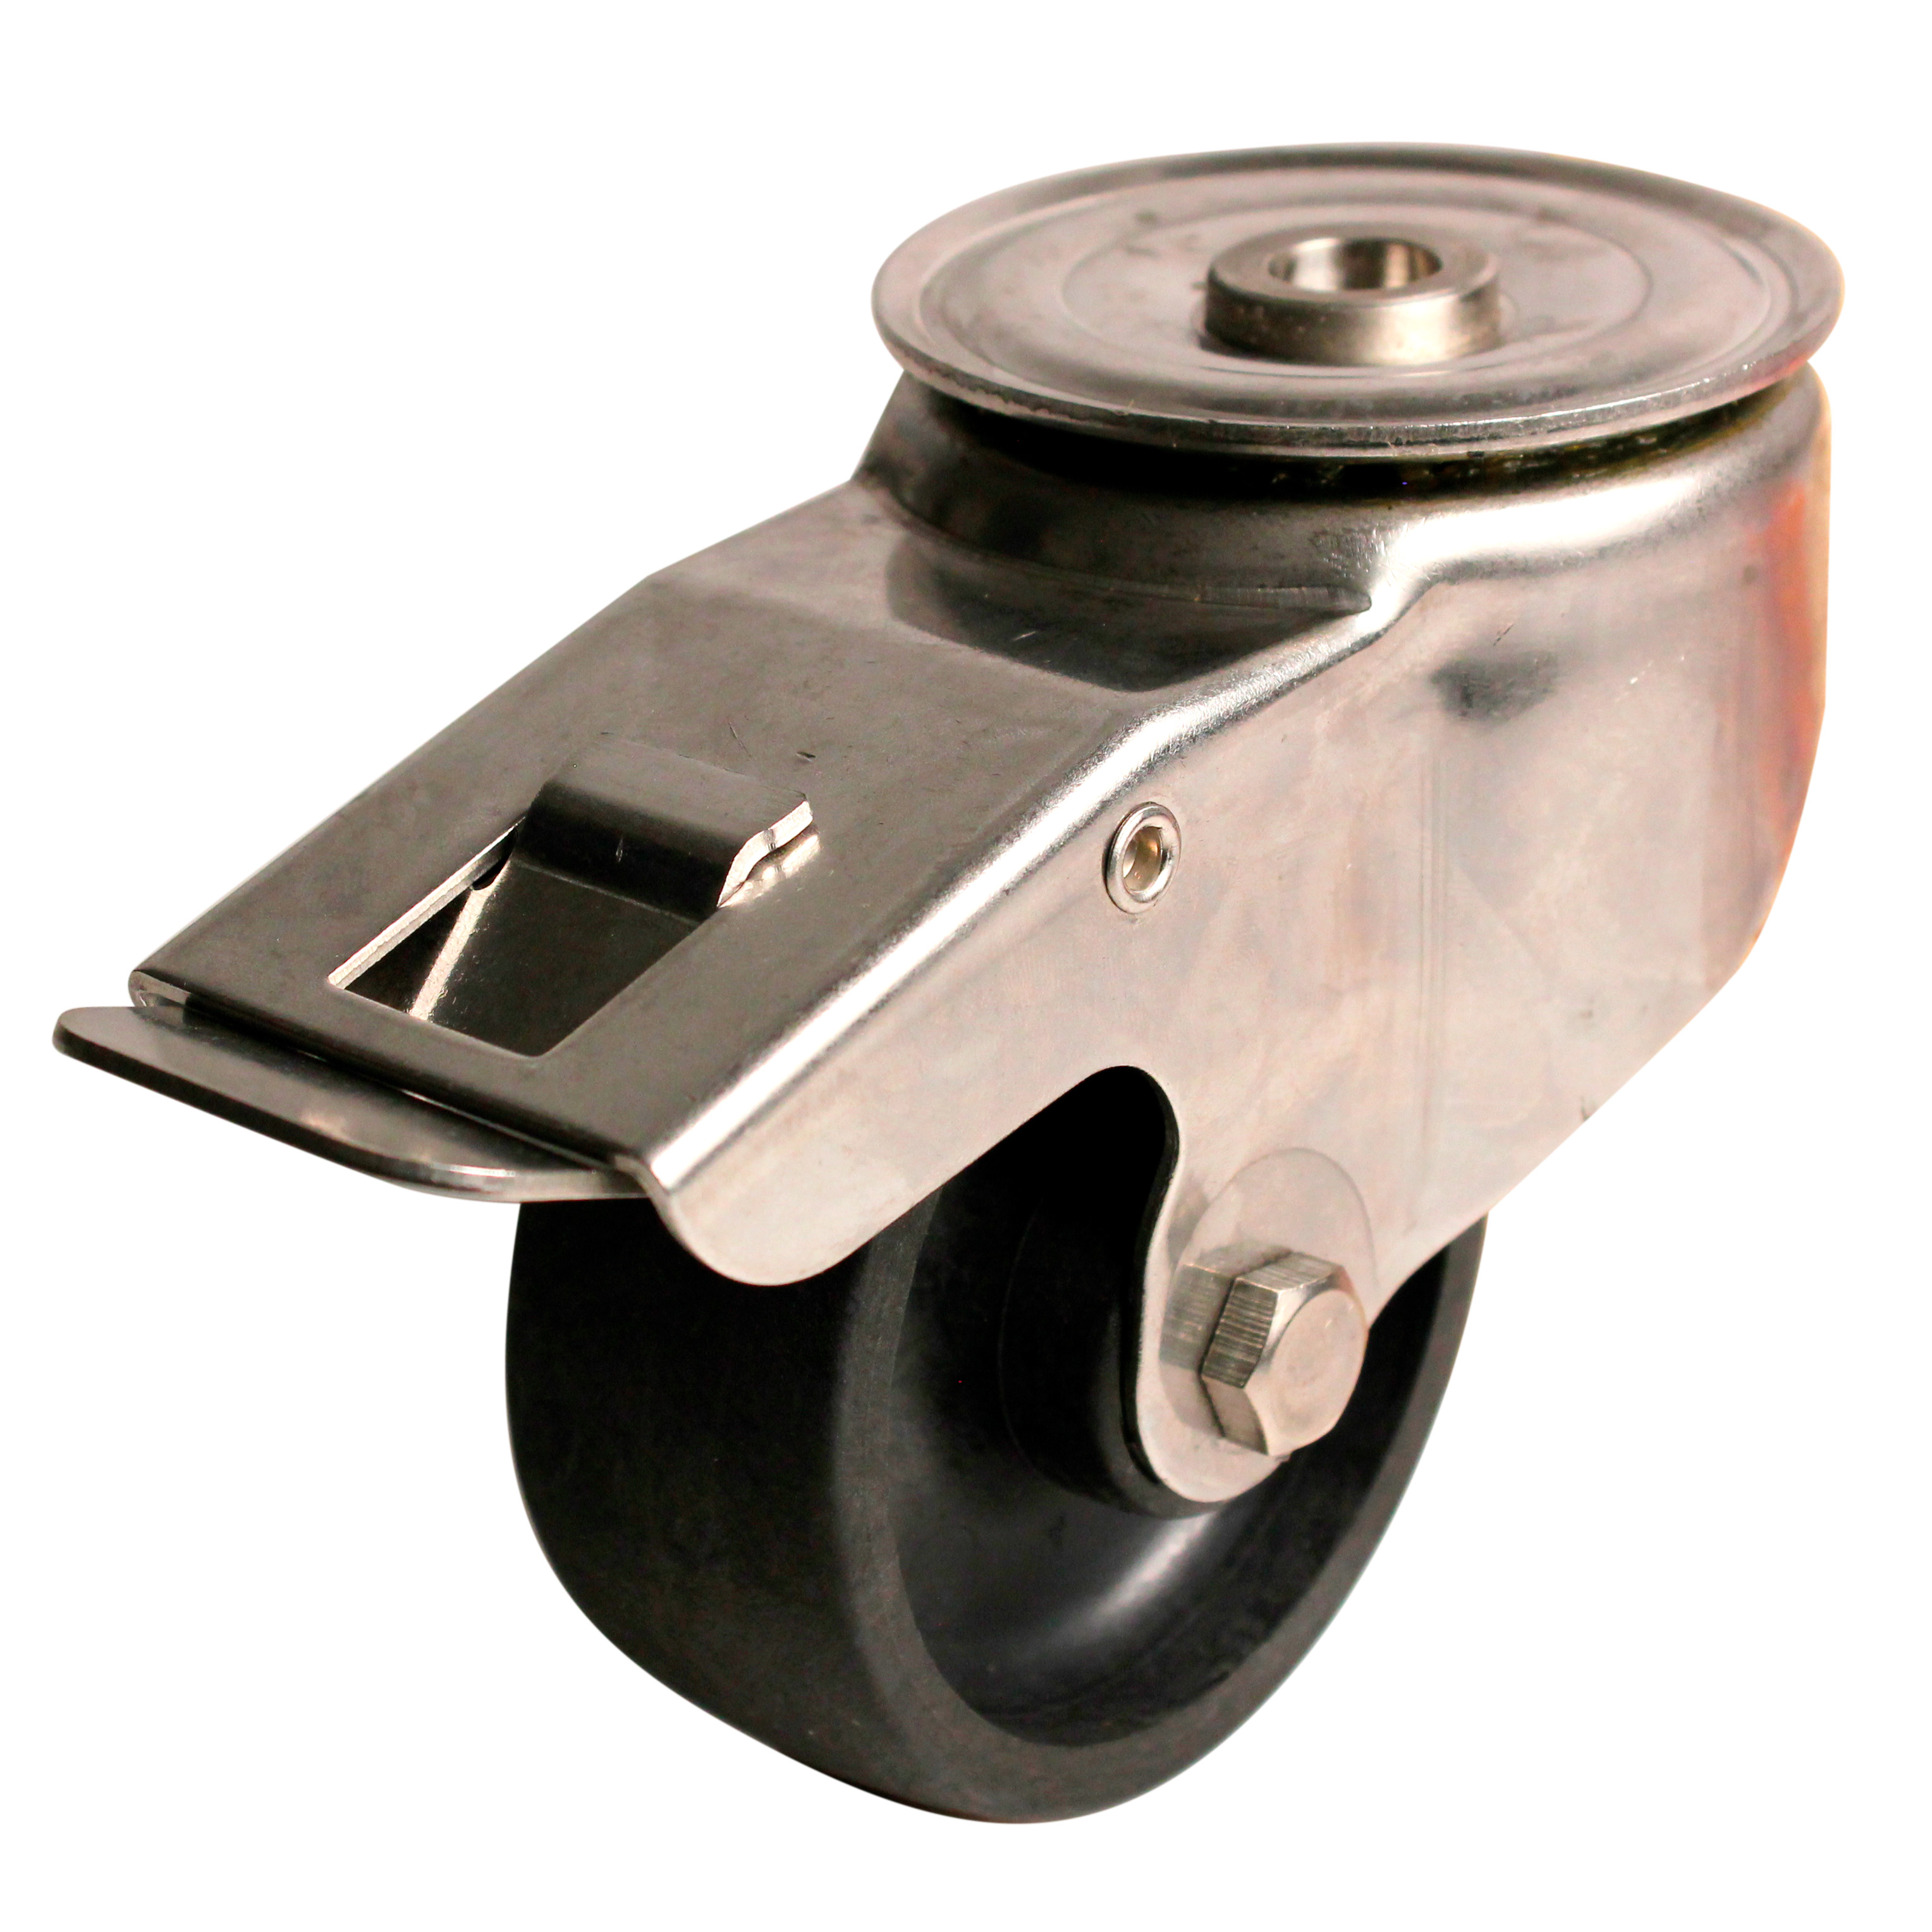 High Temperature Castor - up to 200kg - Double locking swivel - 304 stainless steel